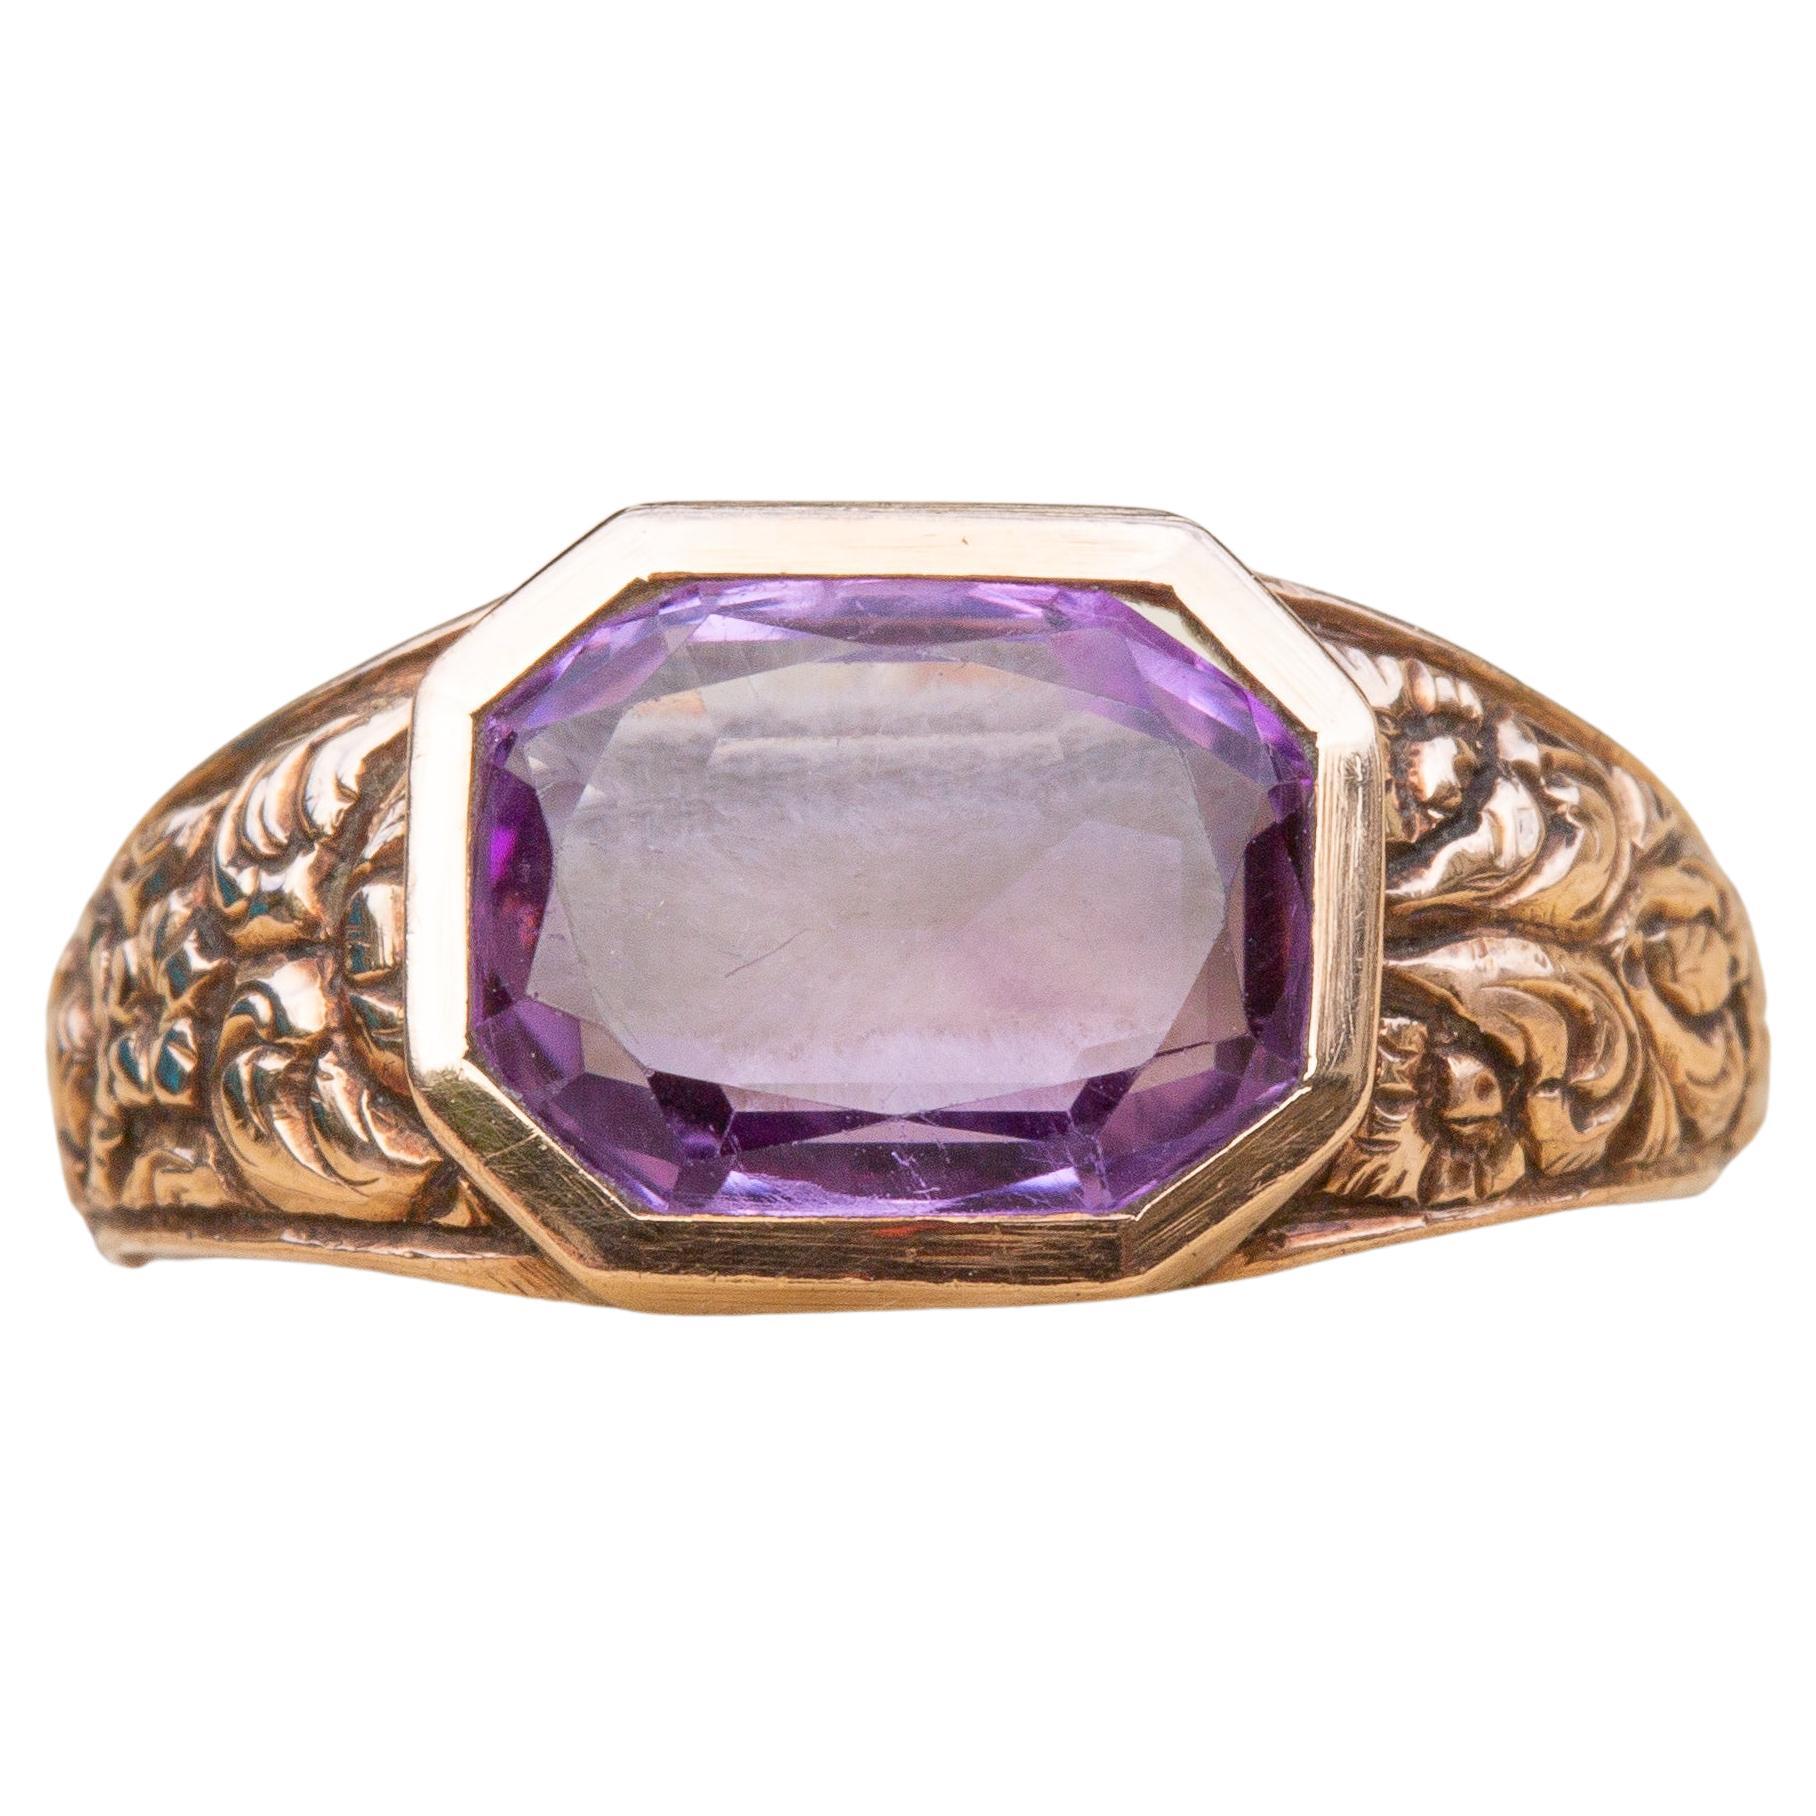 Stunning Antique Victorian 19th Century 14k Gold and Amethyst Ring